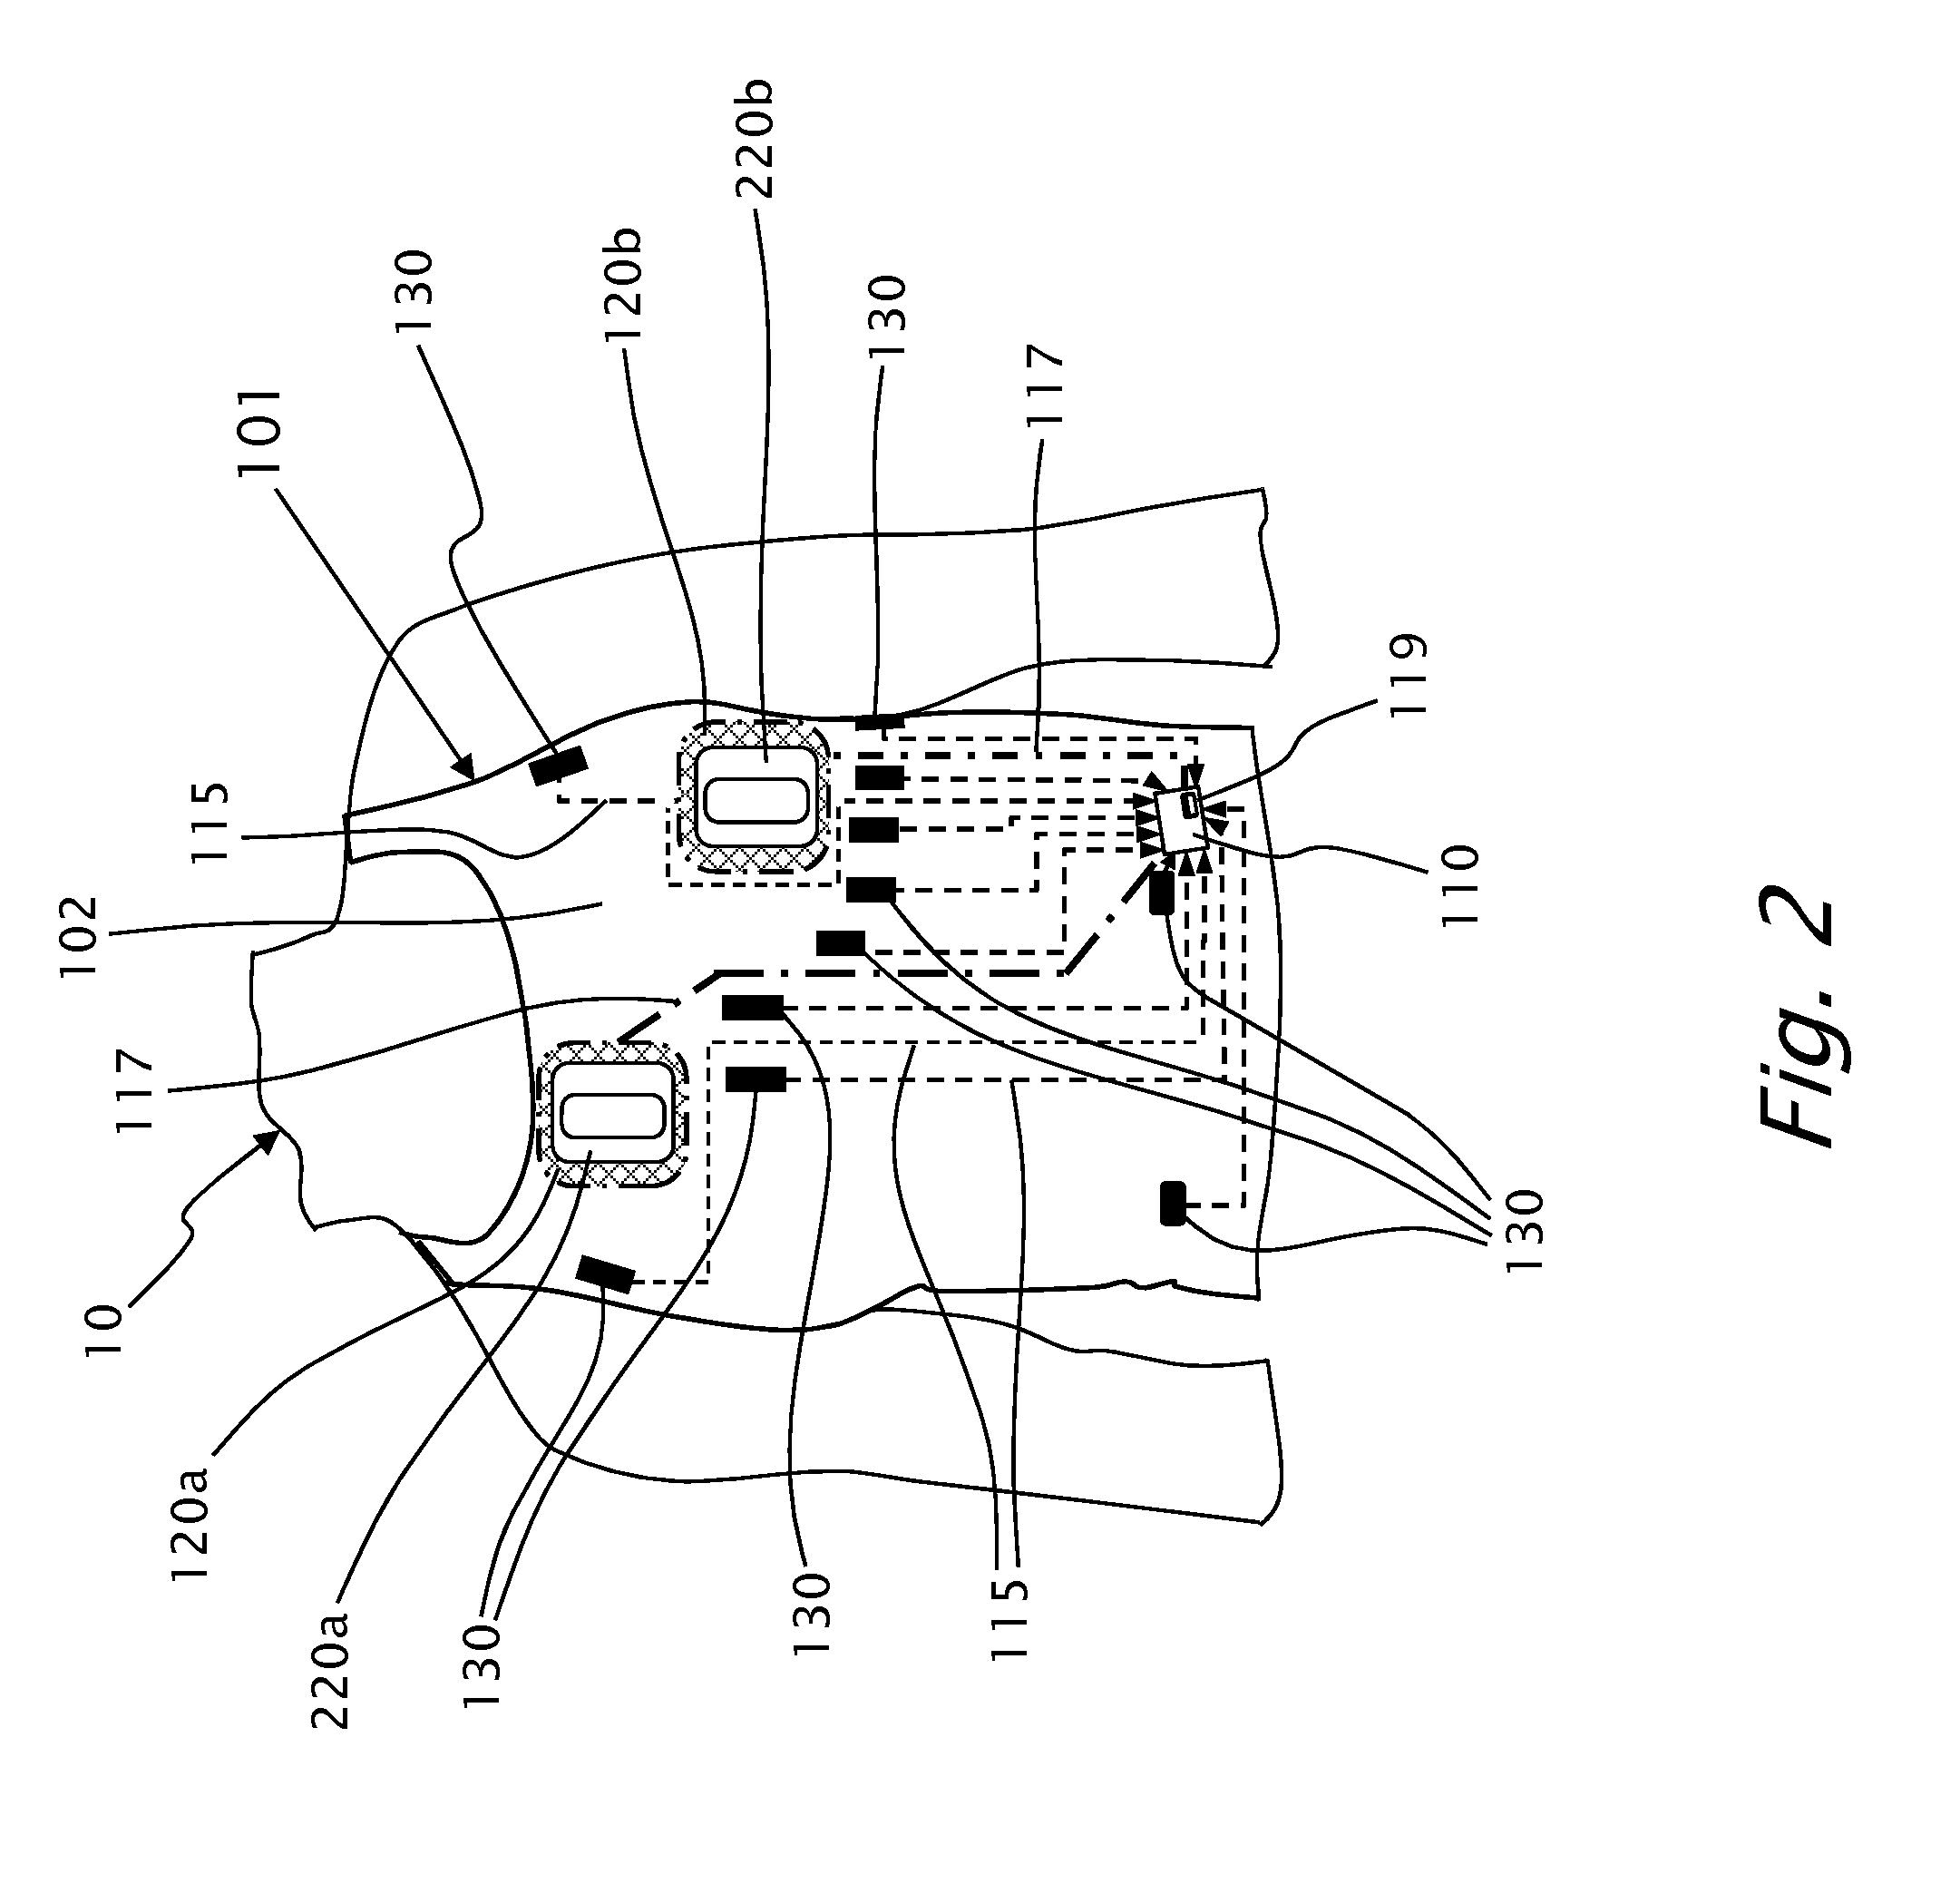 Independent wearable health monitoring system, adapted to interface with a treatment device